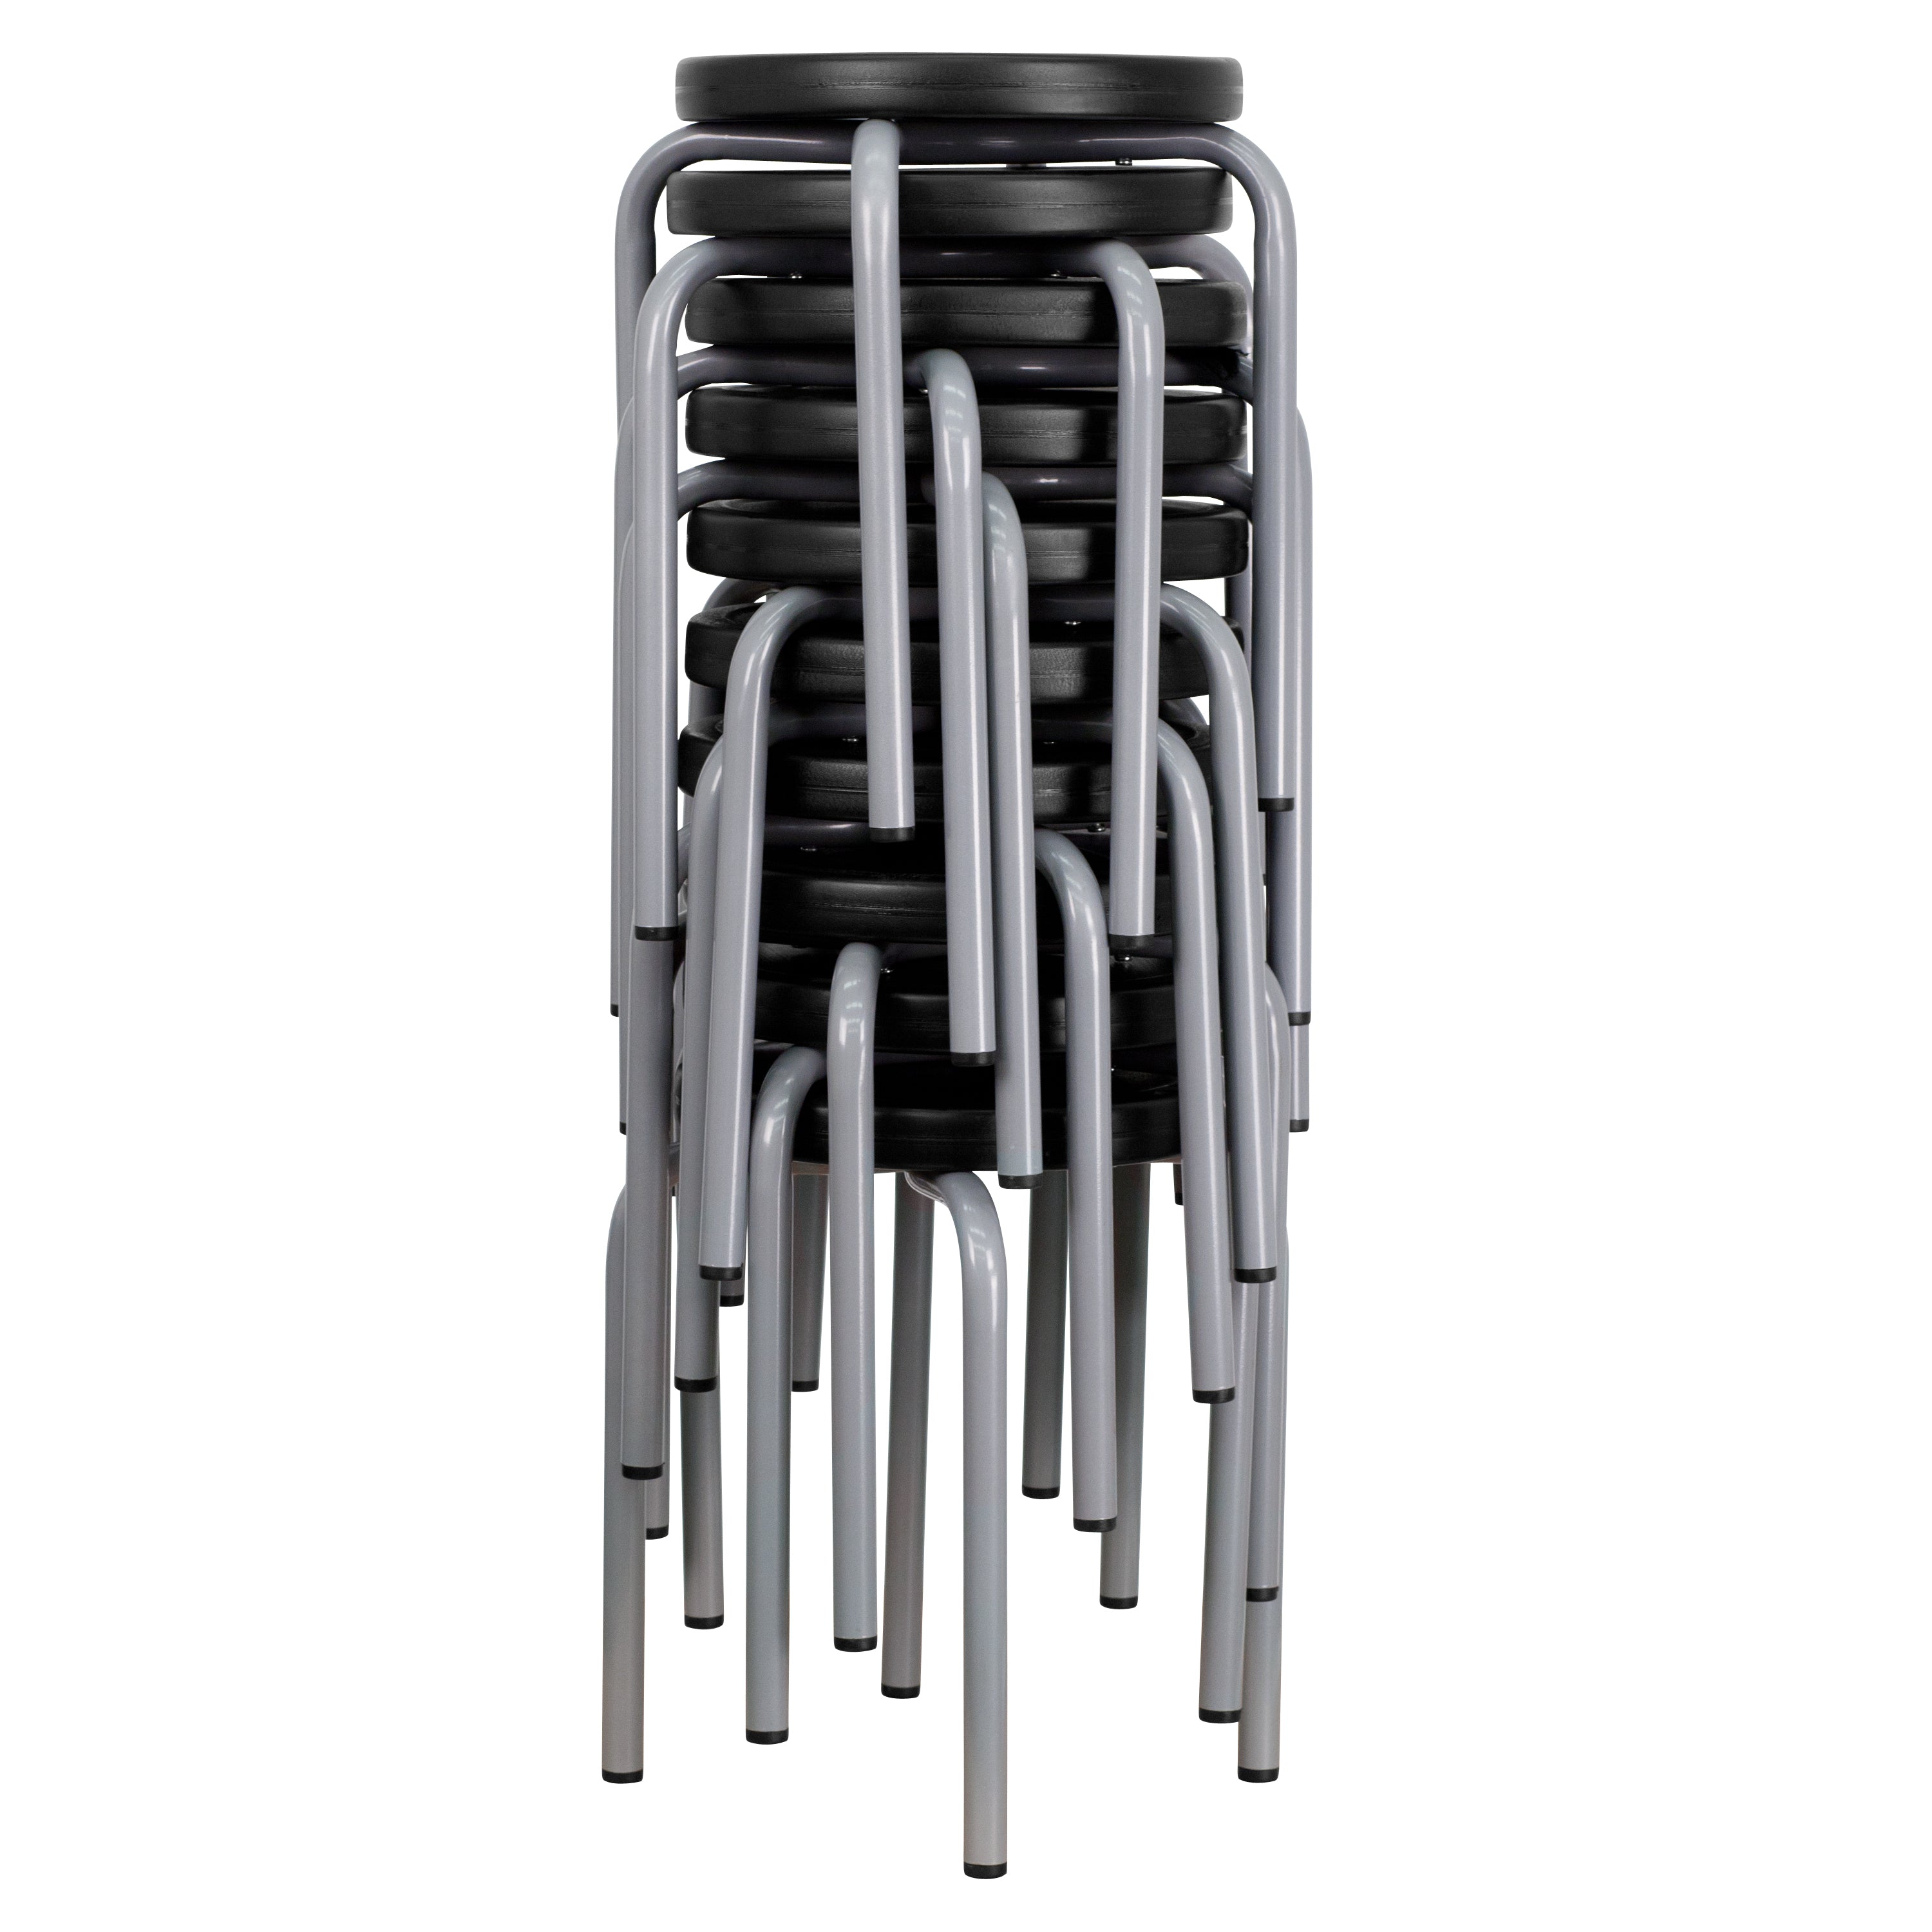 Stackable Stool with Silver Powder Coated Frame-Office Chair-Flash Furniture-Wall2Wall Furnishings